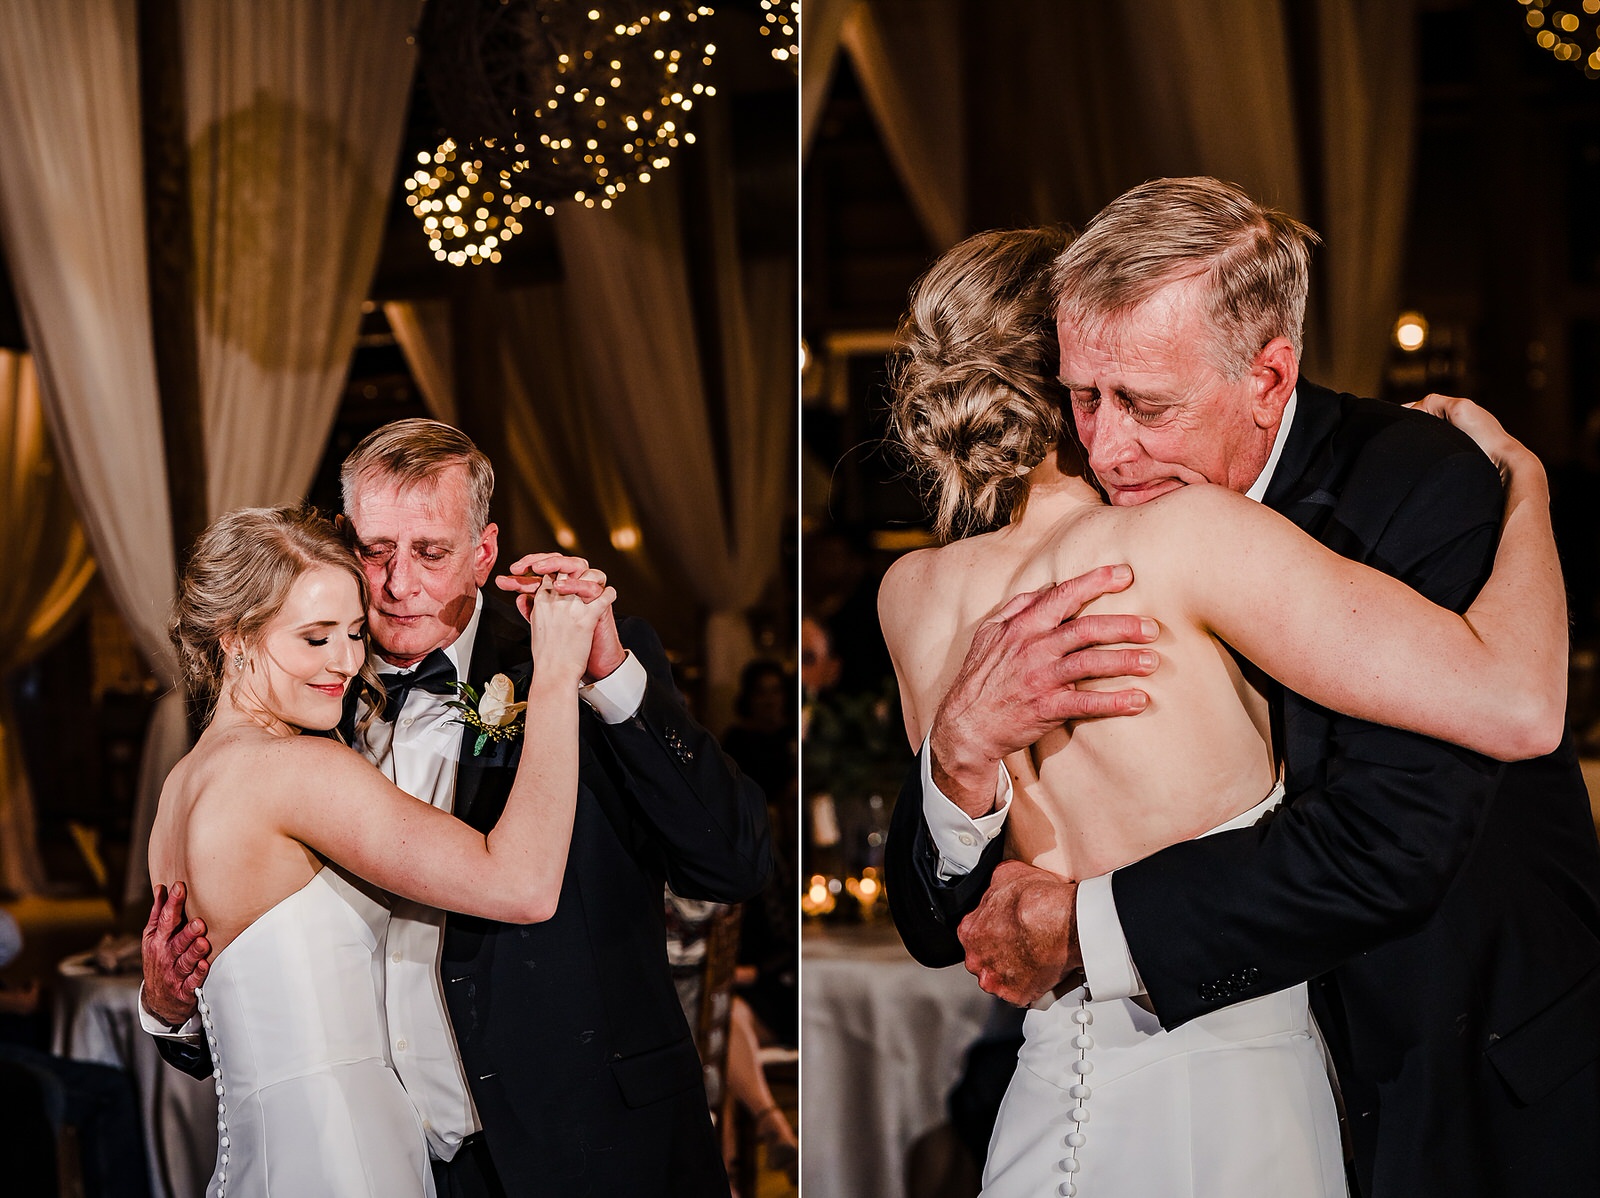 This bride recorded a message to her father to play during the father daughter dance and his reaction was priceless. 